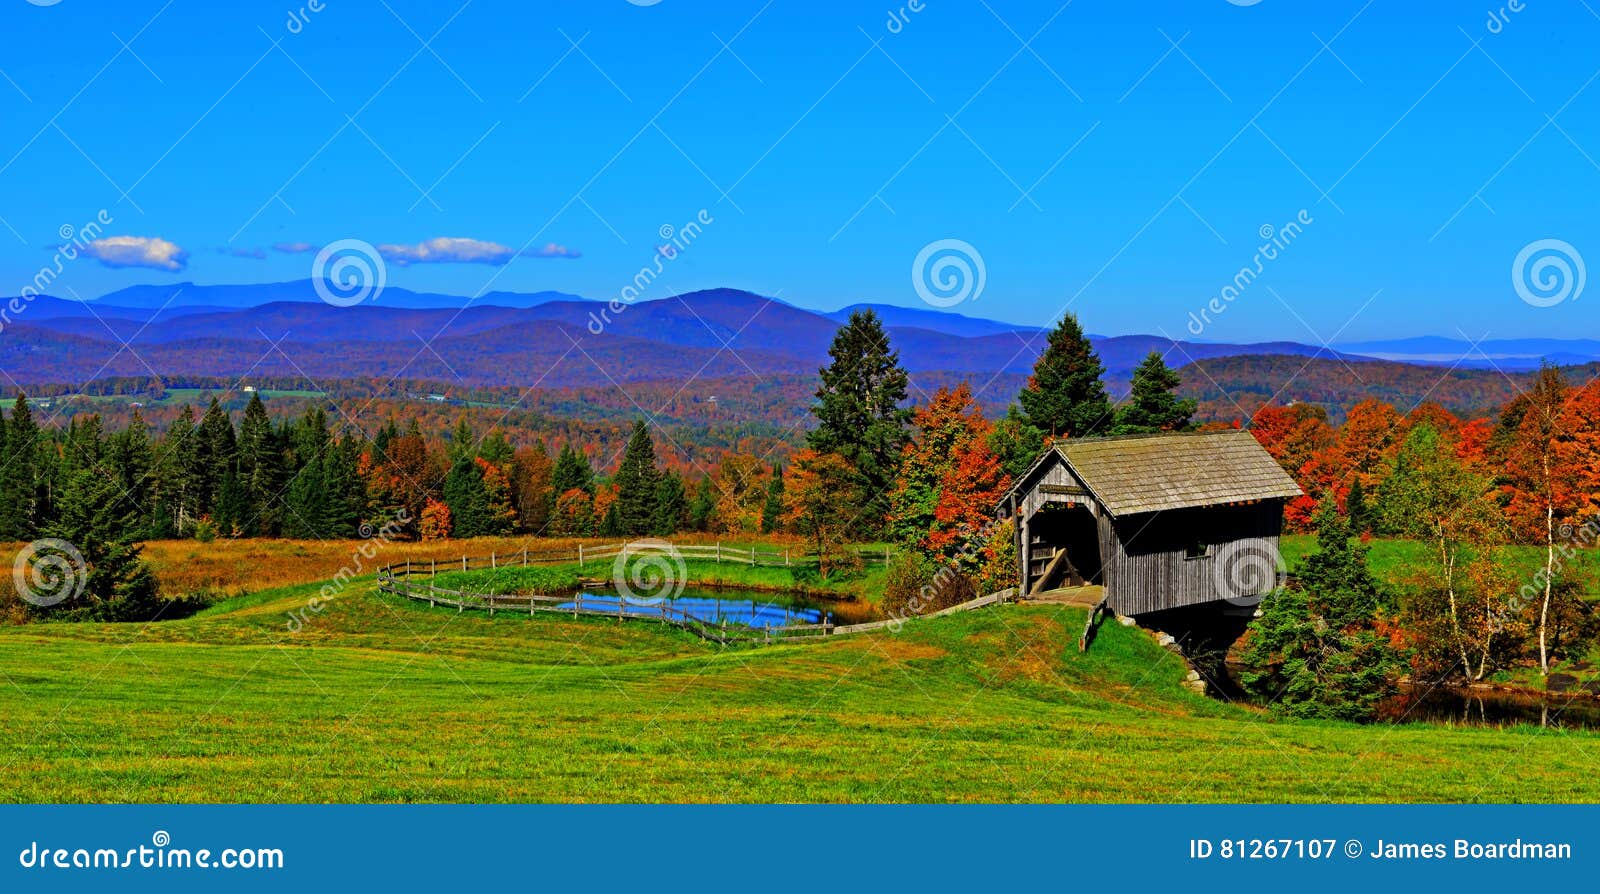 19th century covered bridge in rolling green mountains of vermont hdr.